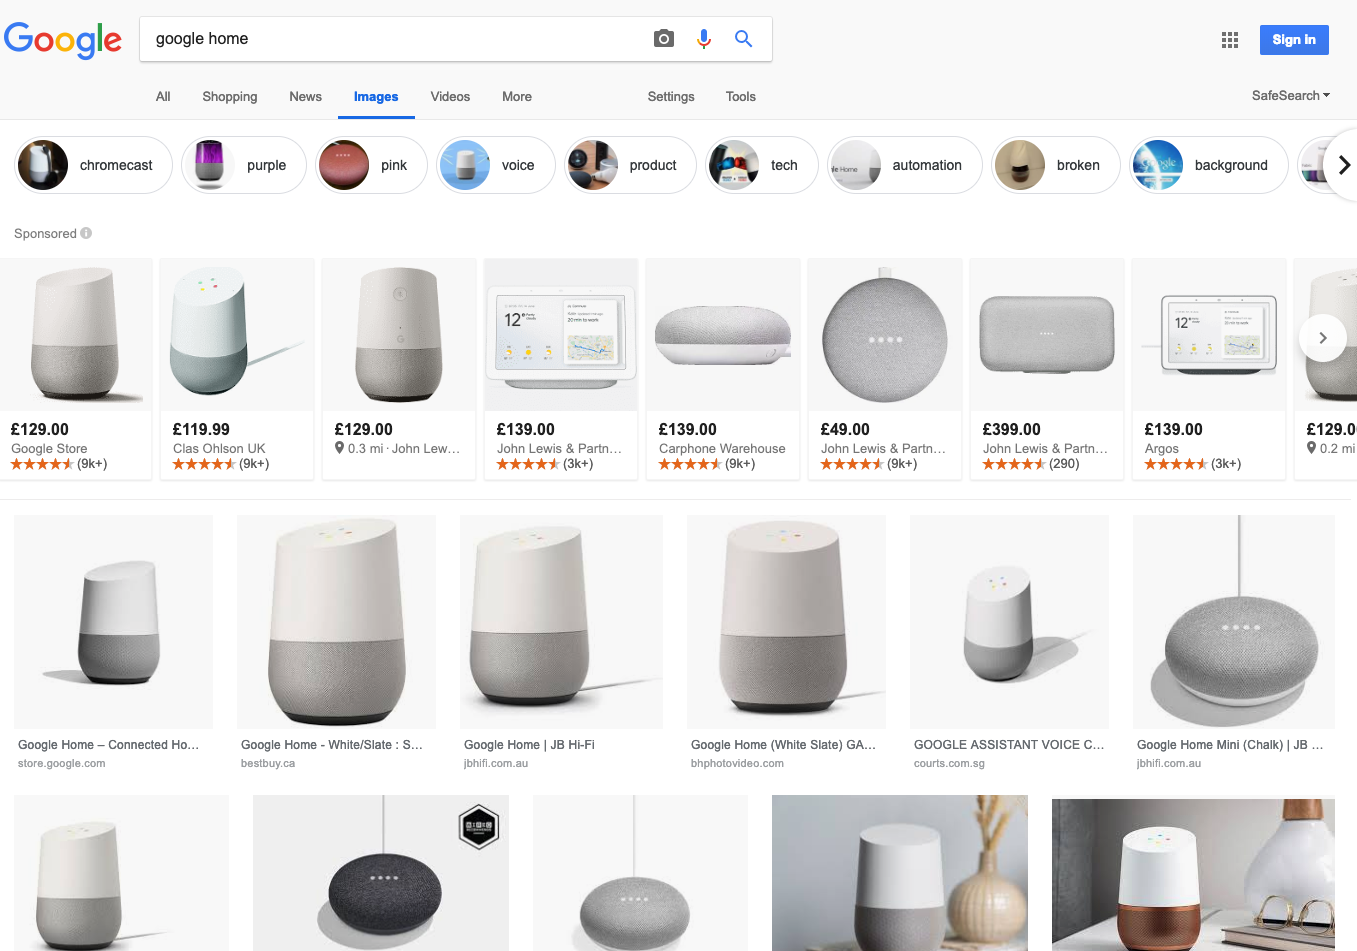 google home image search